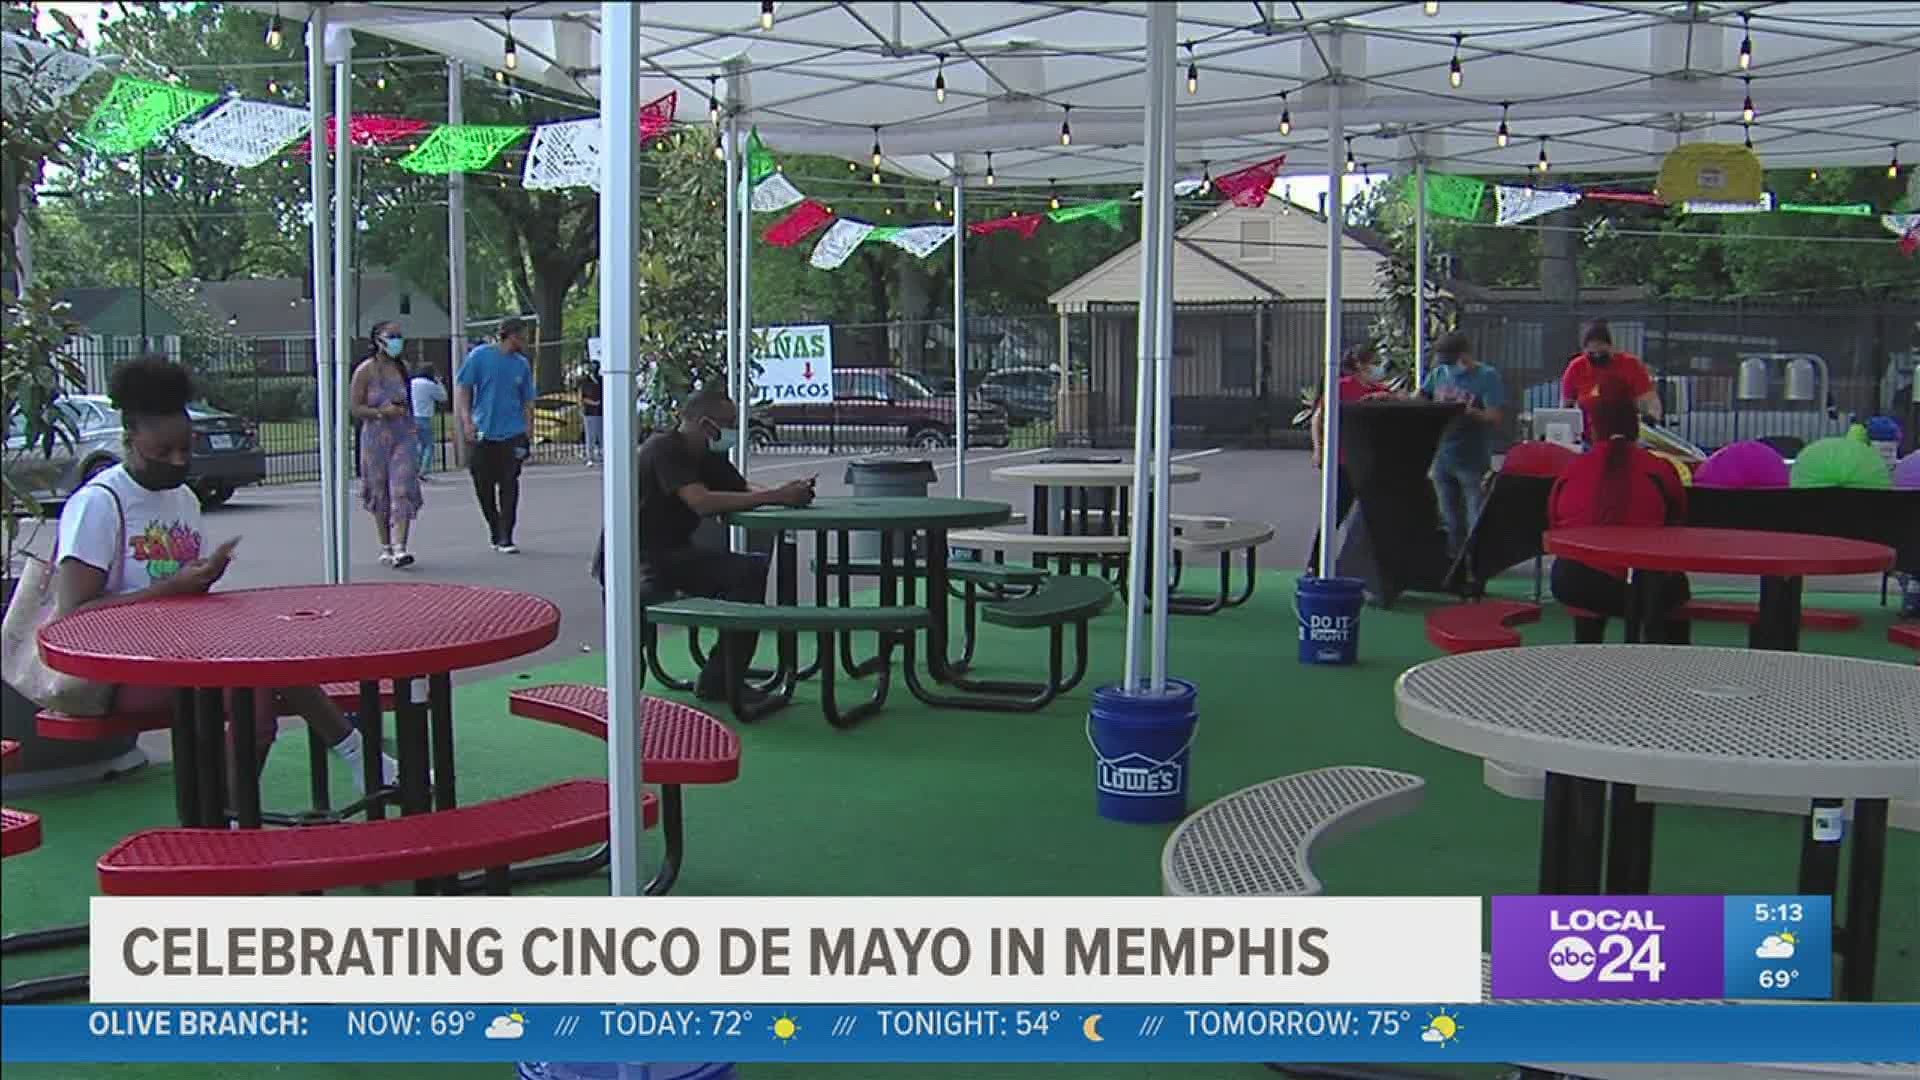 Many restaurants will offer specials hoping to get a boost in business for Cinco de Mayo.